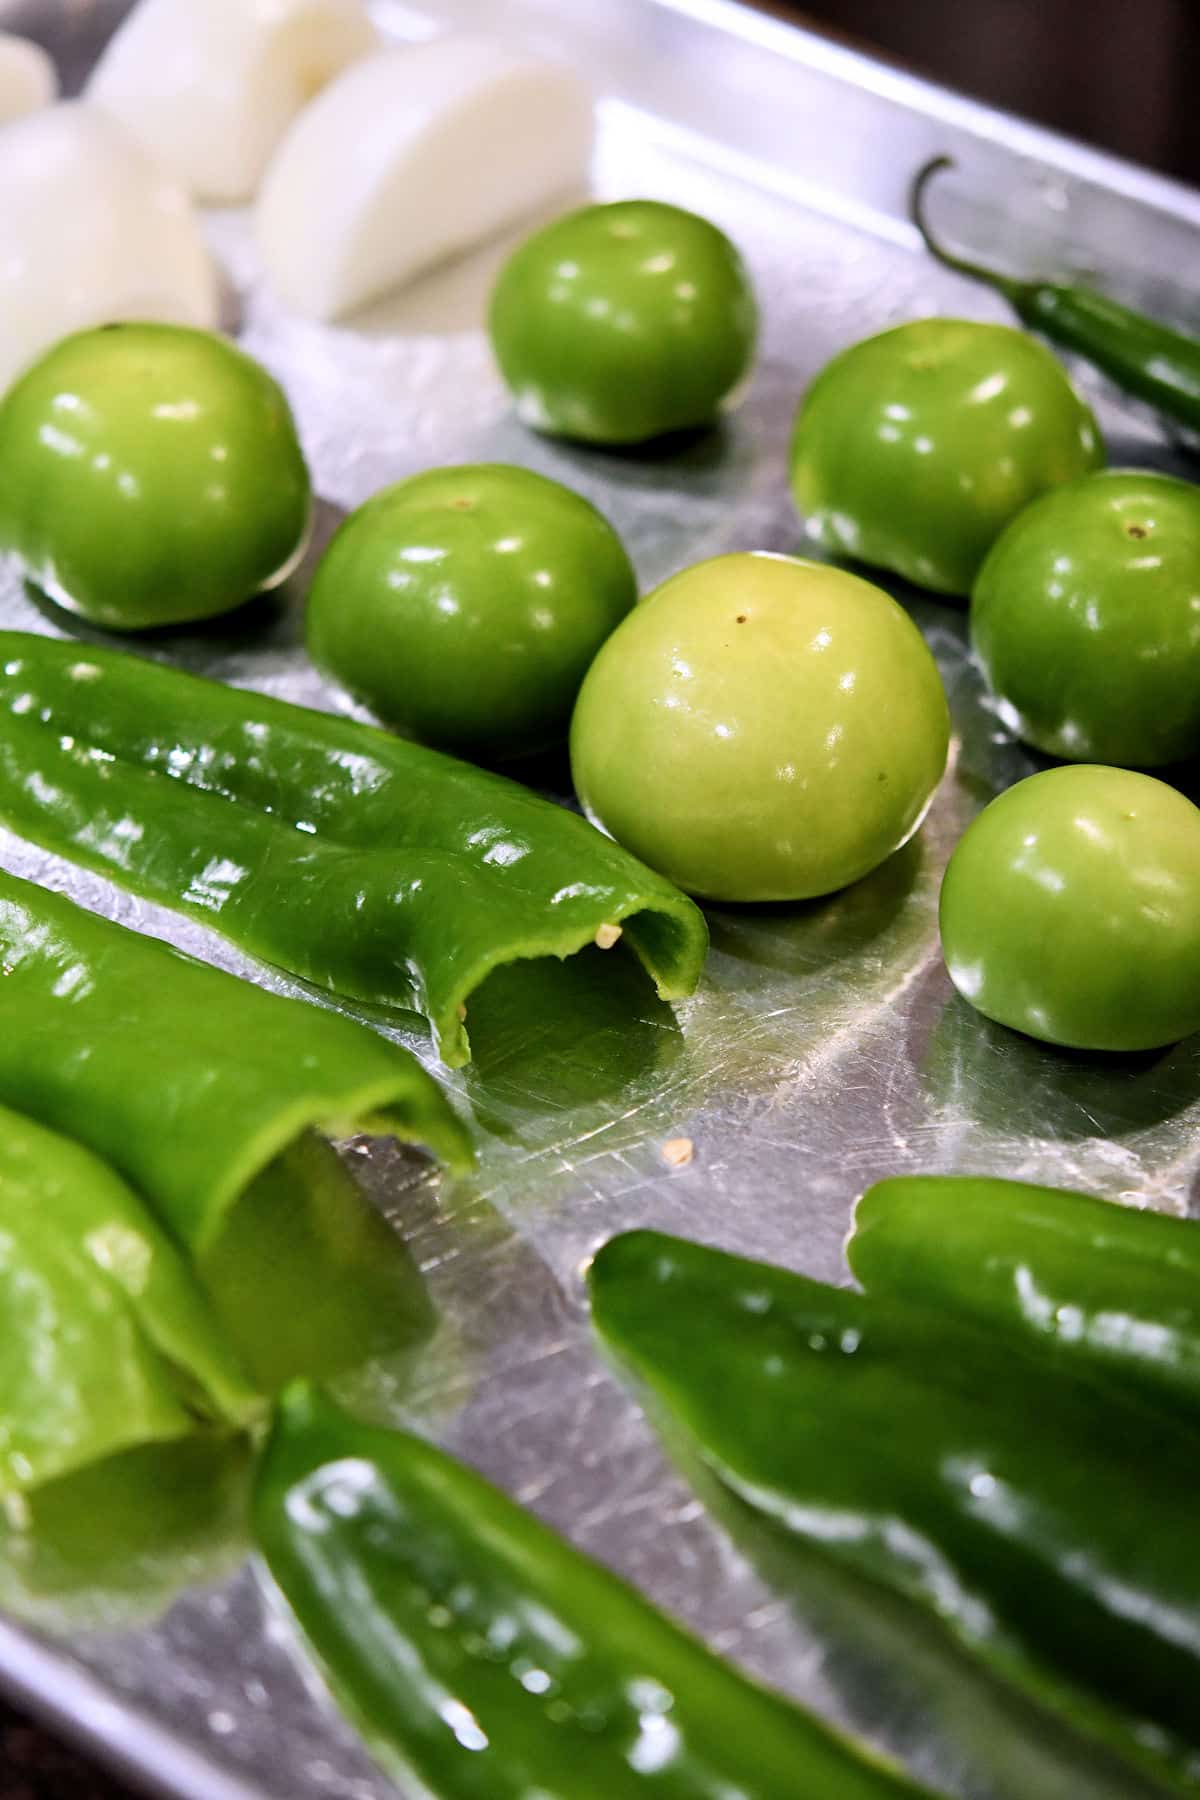 Anaheim chiles and tomatillos on a baking sheet, ready for broiling in the oven